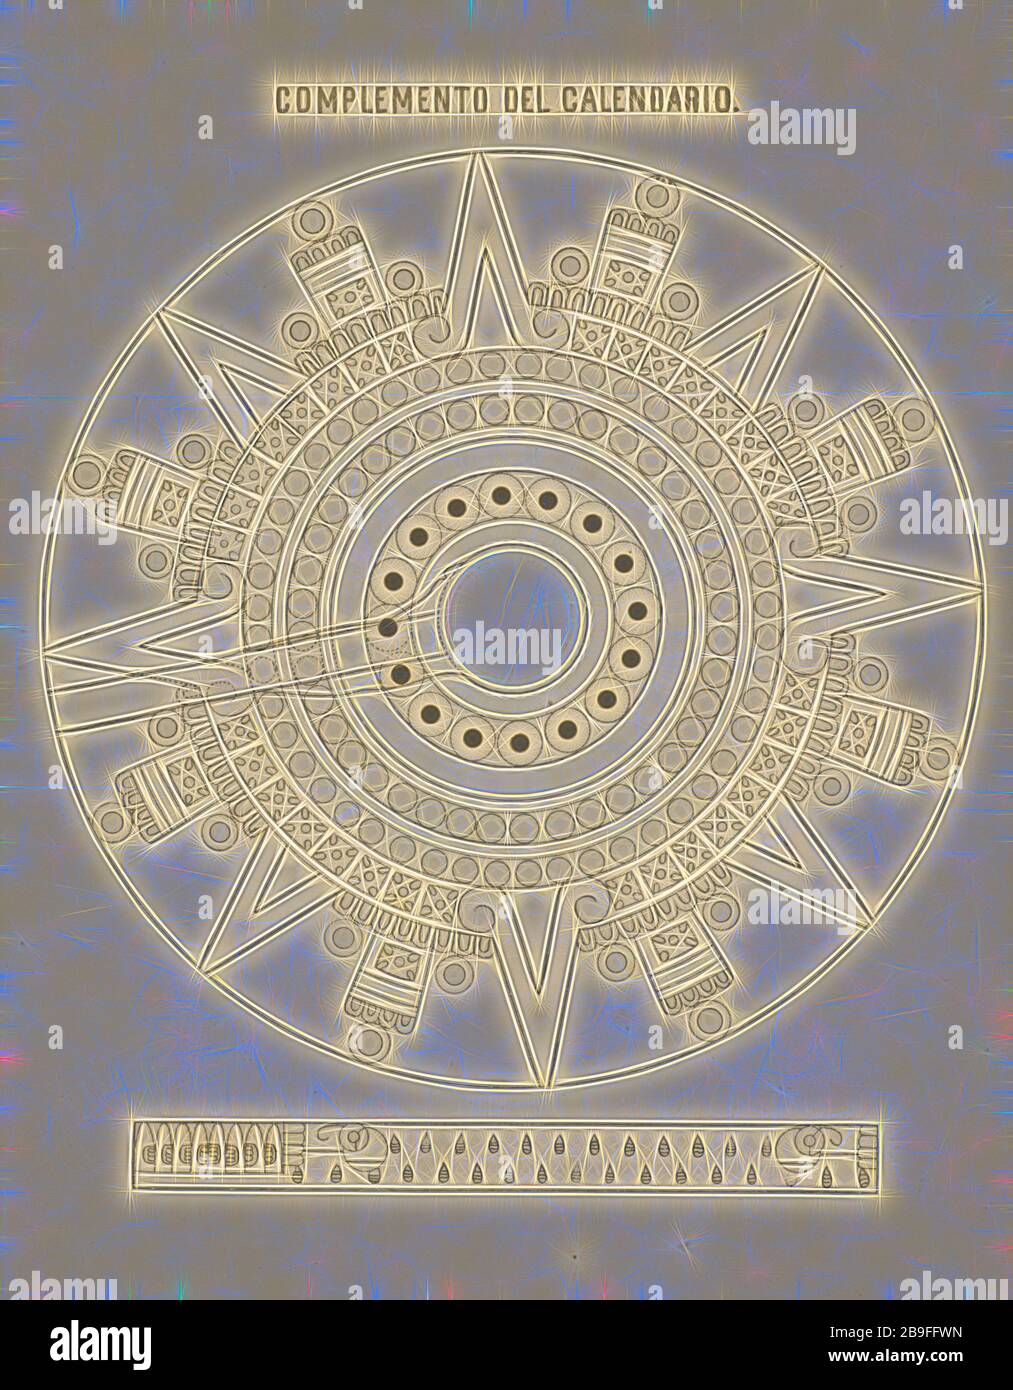 Complemento del calendario, Estudio arqueológico y jeroglífico del Calendario ó gran libro astronómico histórico y cronológico de los antiguos indios, Abadiano, Dionisio, Unknown, 1889, Reimagined by Gibon, design of warm cheerful glowing of brightness and light rays radiance. Classic art reinvented with a modern twist. Photography inspired by futurism, embracing dynamic energy of modern technology, movement, speed and revolutionize culture. Stock Photo